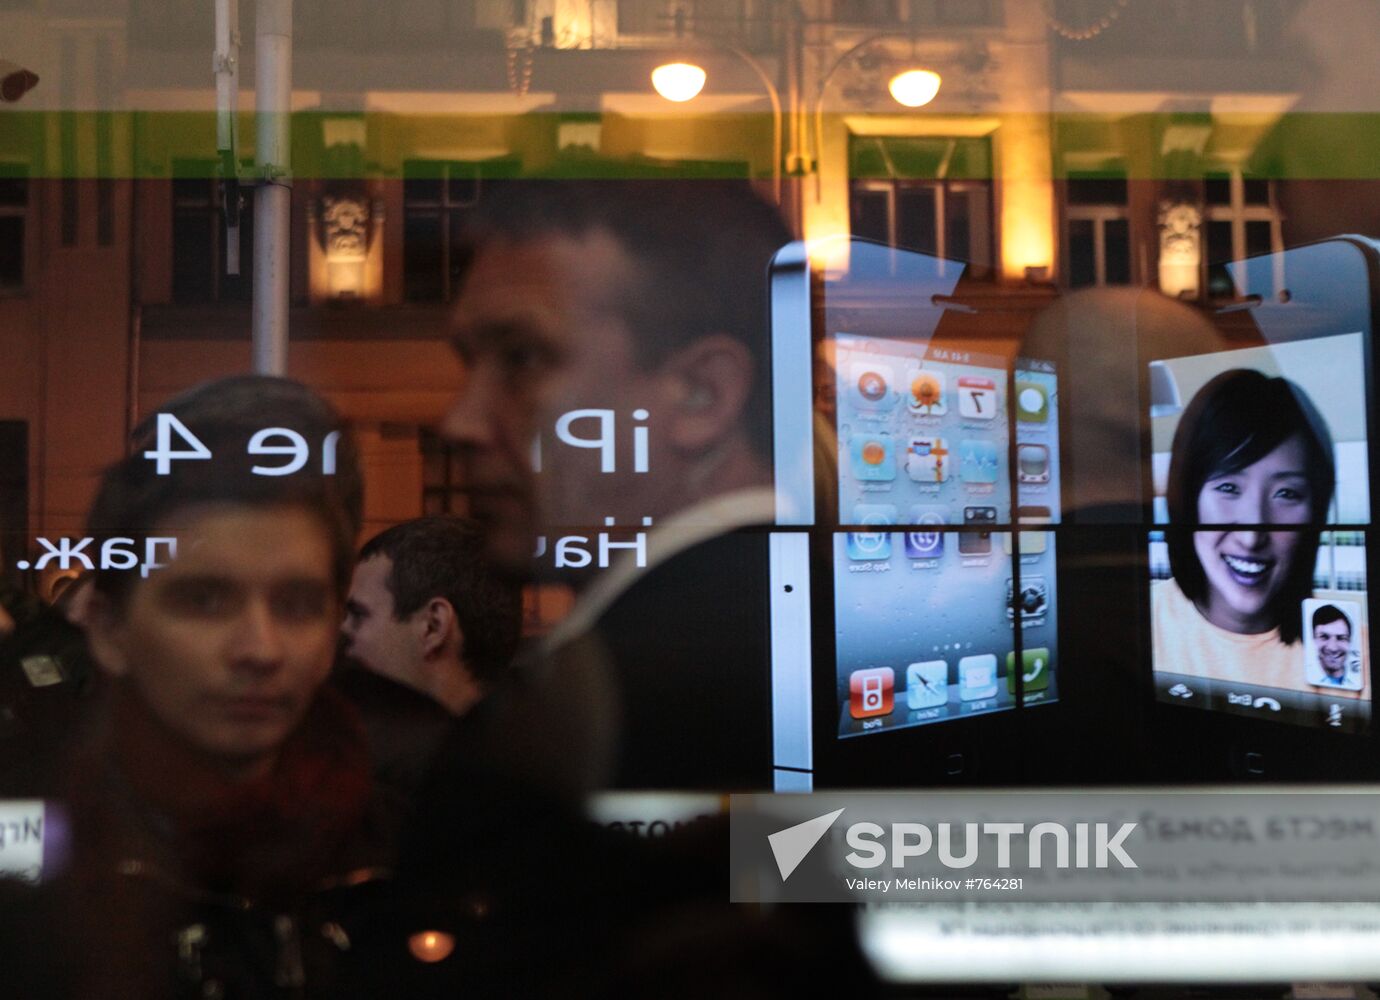 Sales of iPhone 4G kick off in Moscow